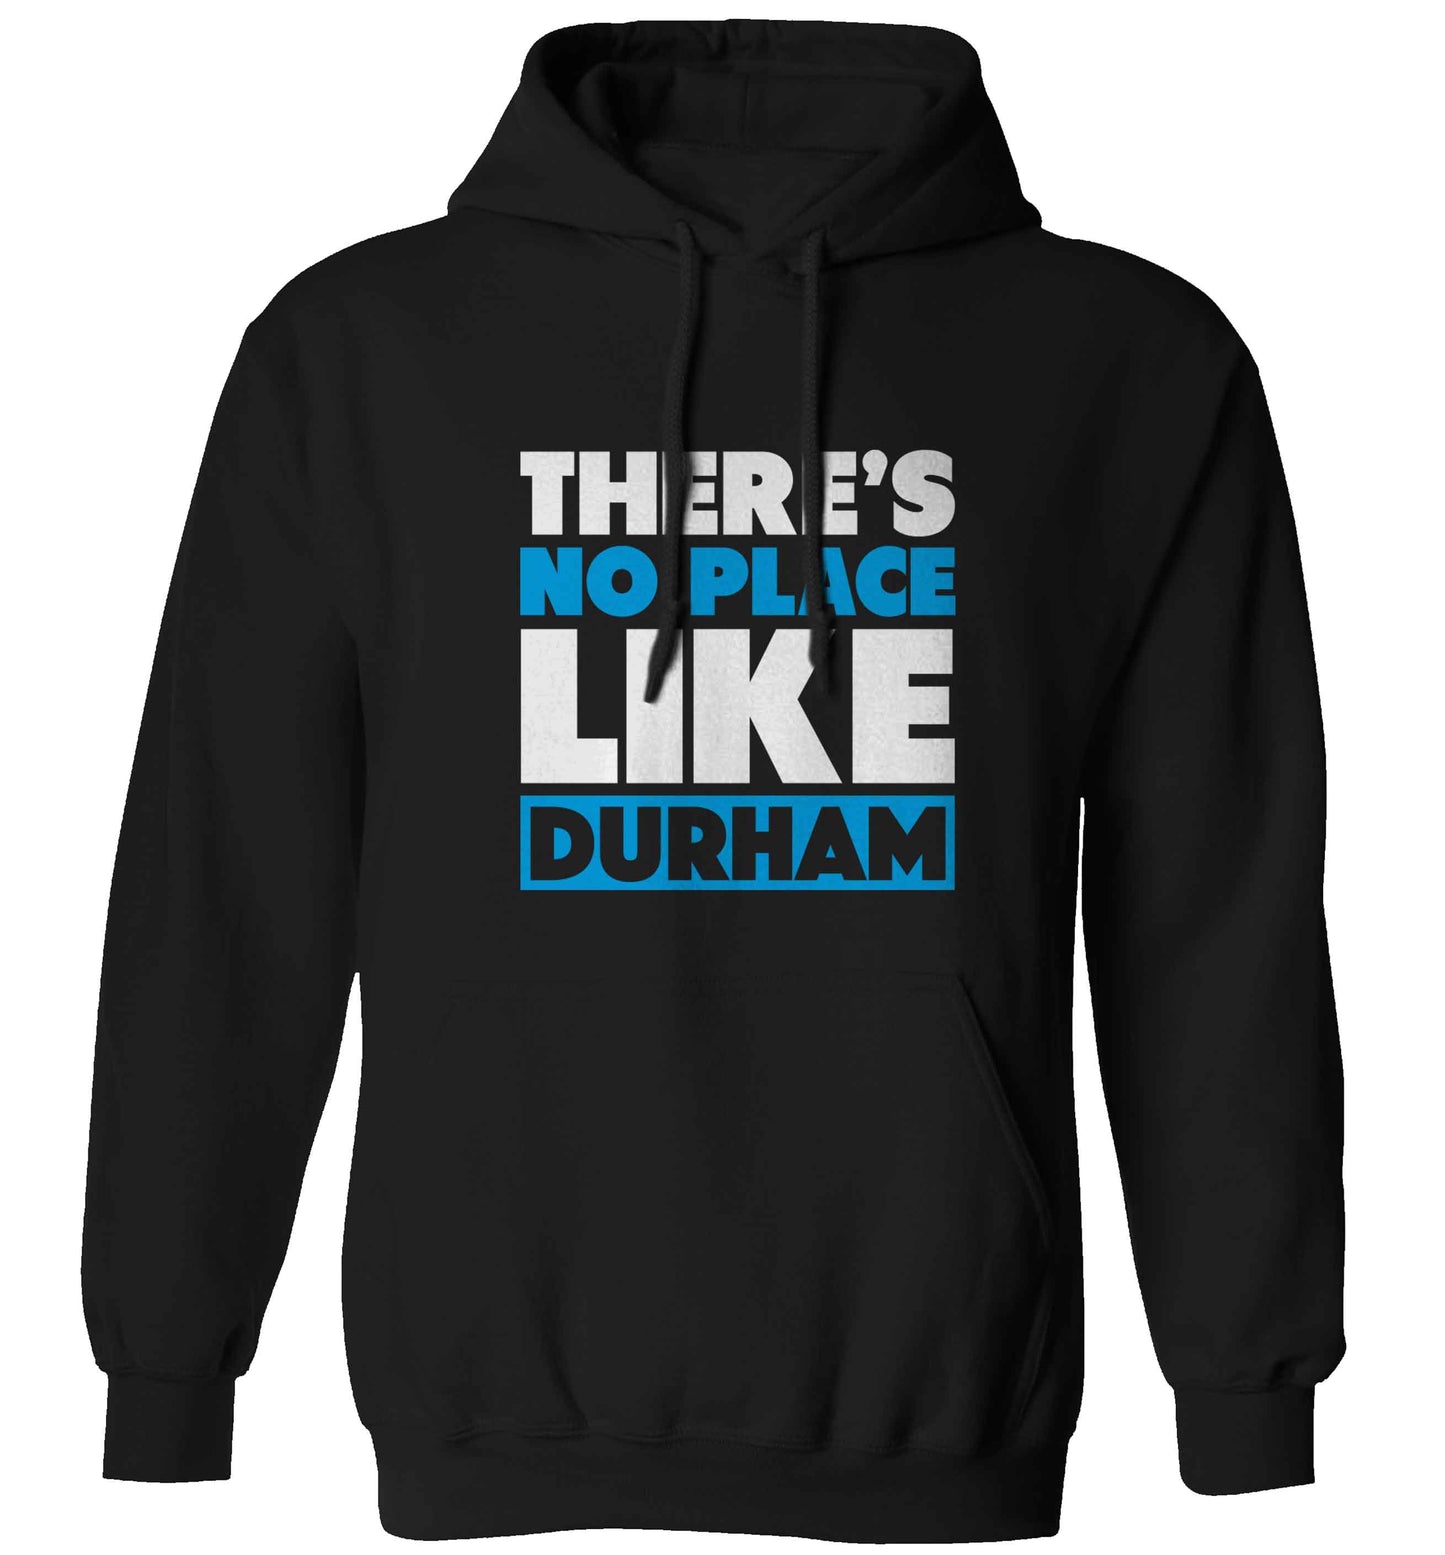 There's no place like Durham adults unisex black hoodie 2XL